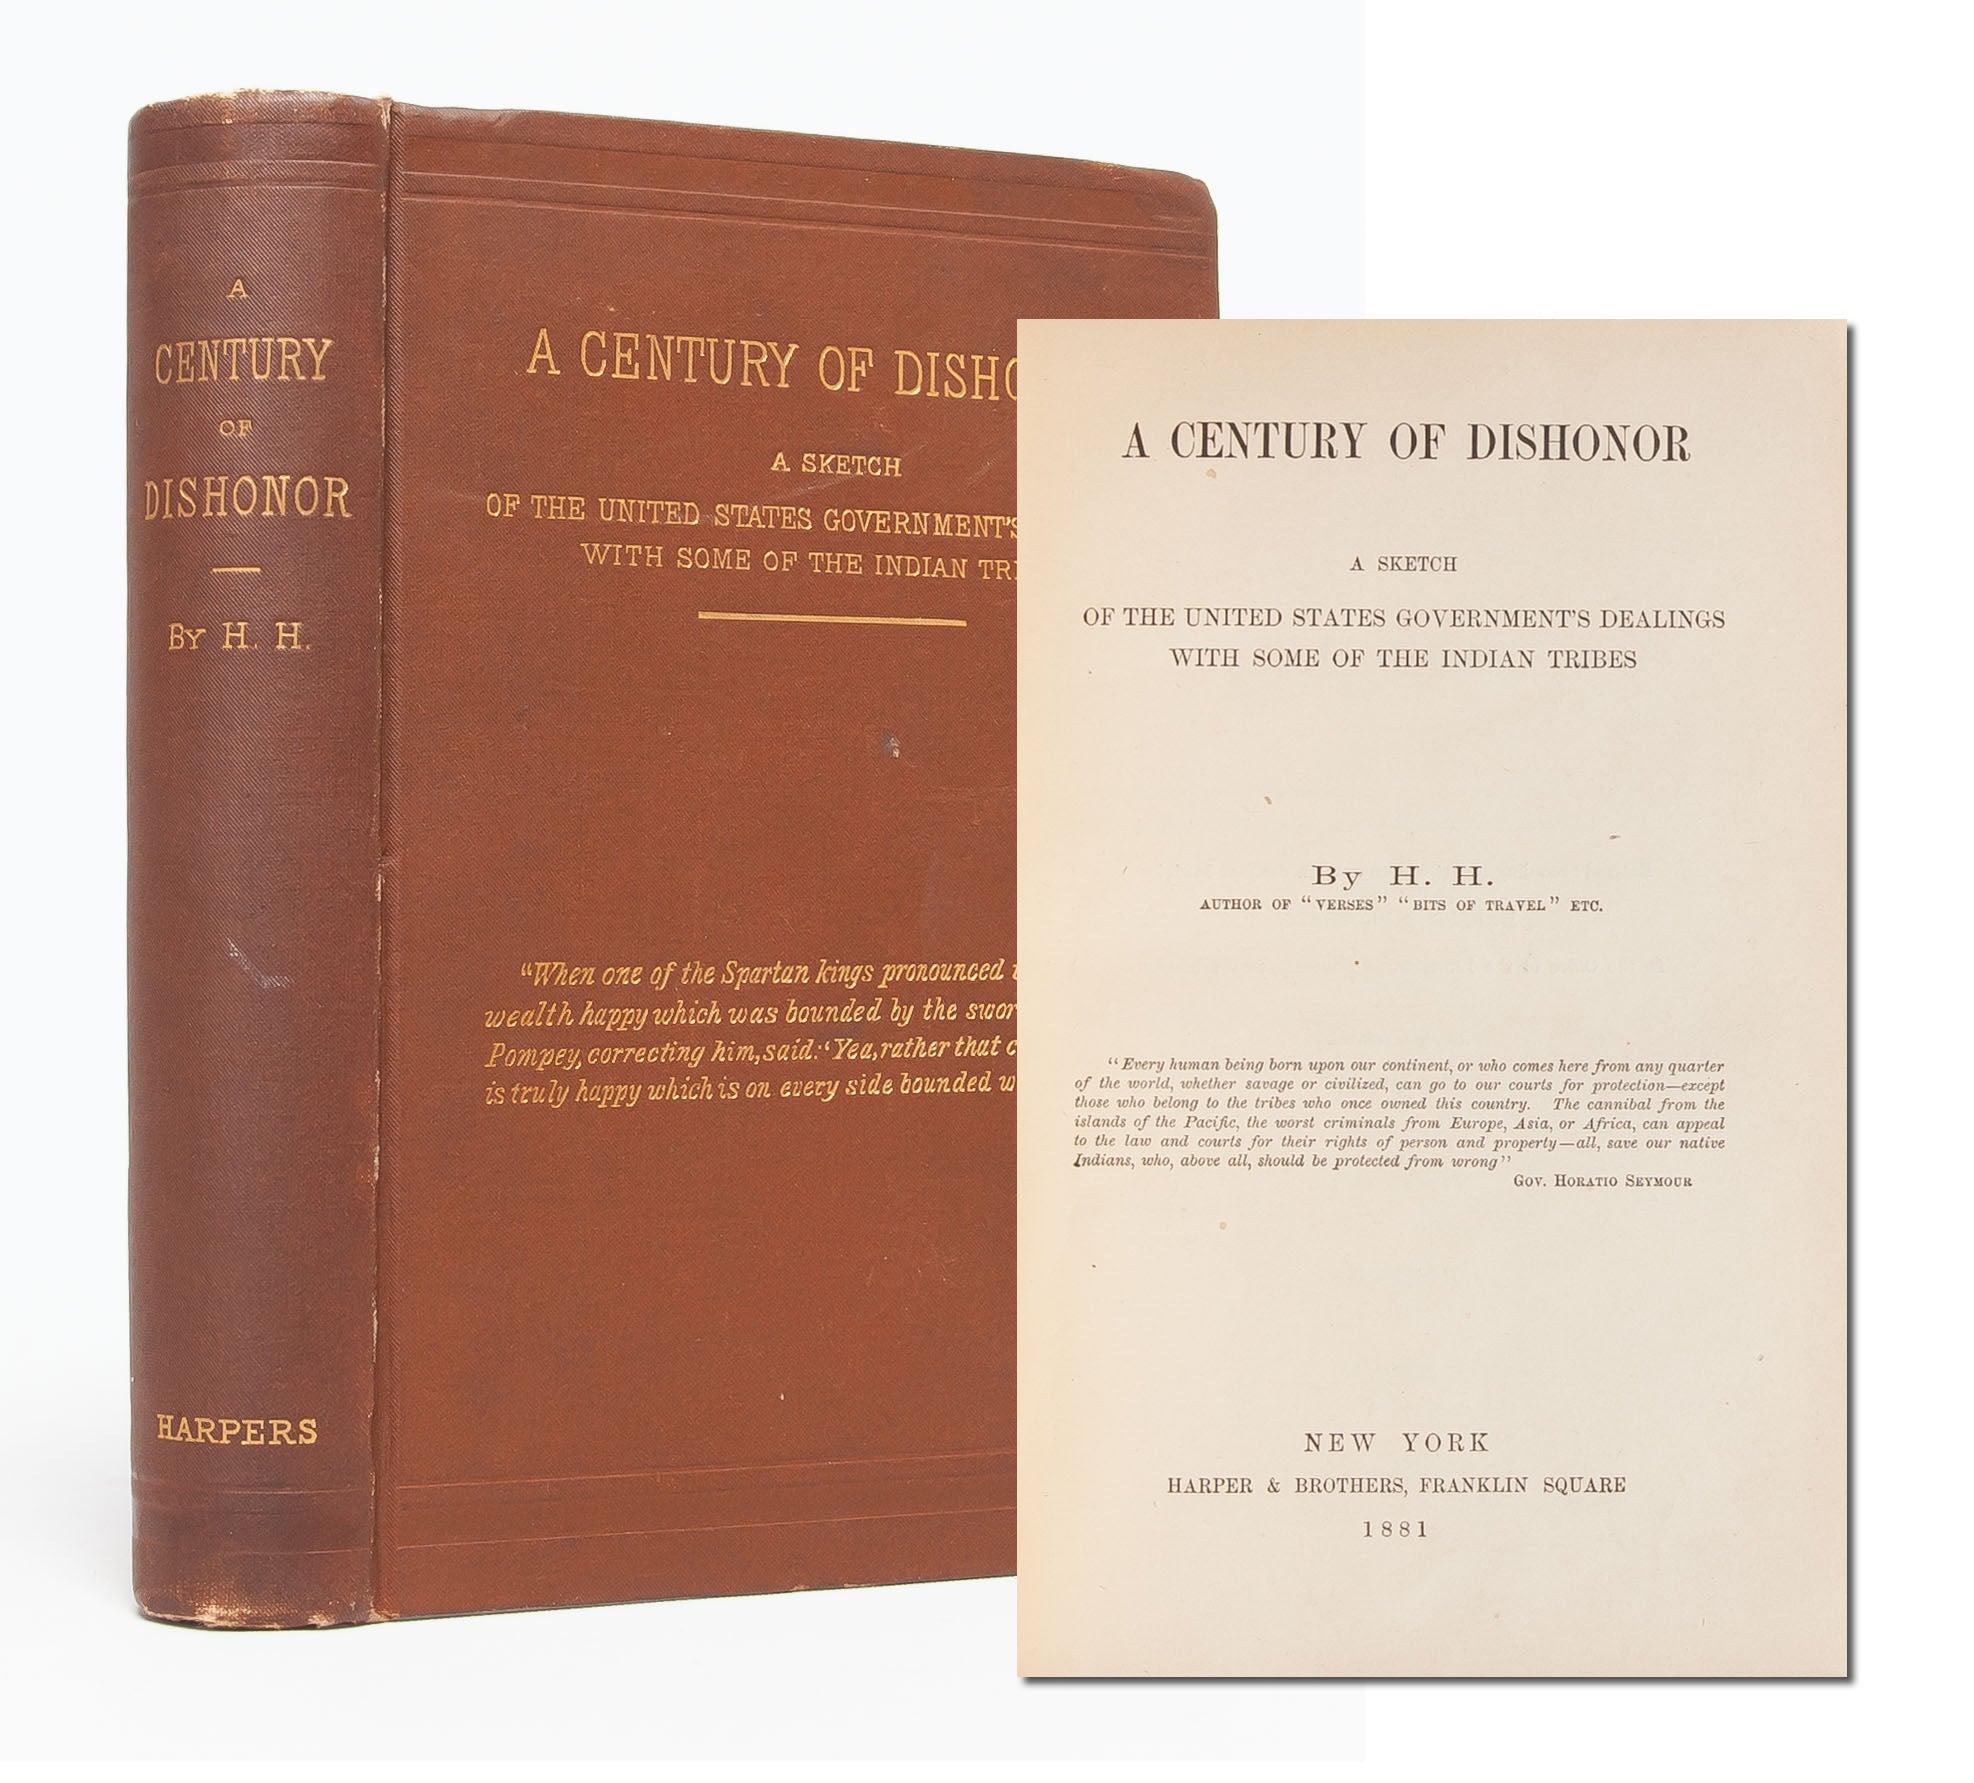 (Item #5733) A Century of Dishonor: A Sketch of the United States Government's Dealings with some of the Indian Tribes. Helen Hunt Jackson, H. H.